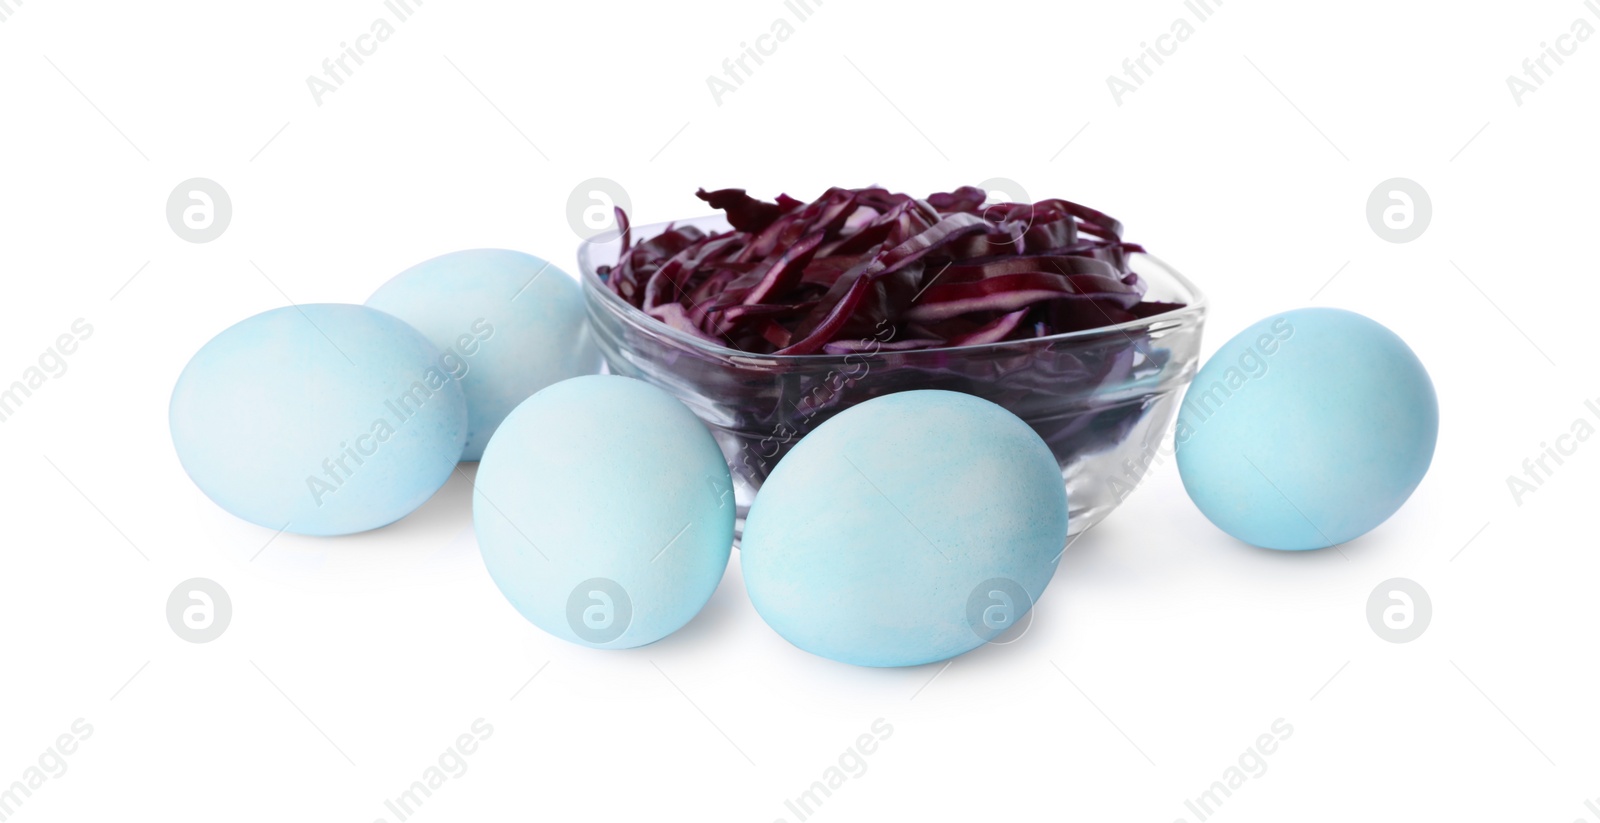 Photo of Light blue Easter eggs painted with natural dye and red shredded cabbage on white background